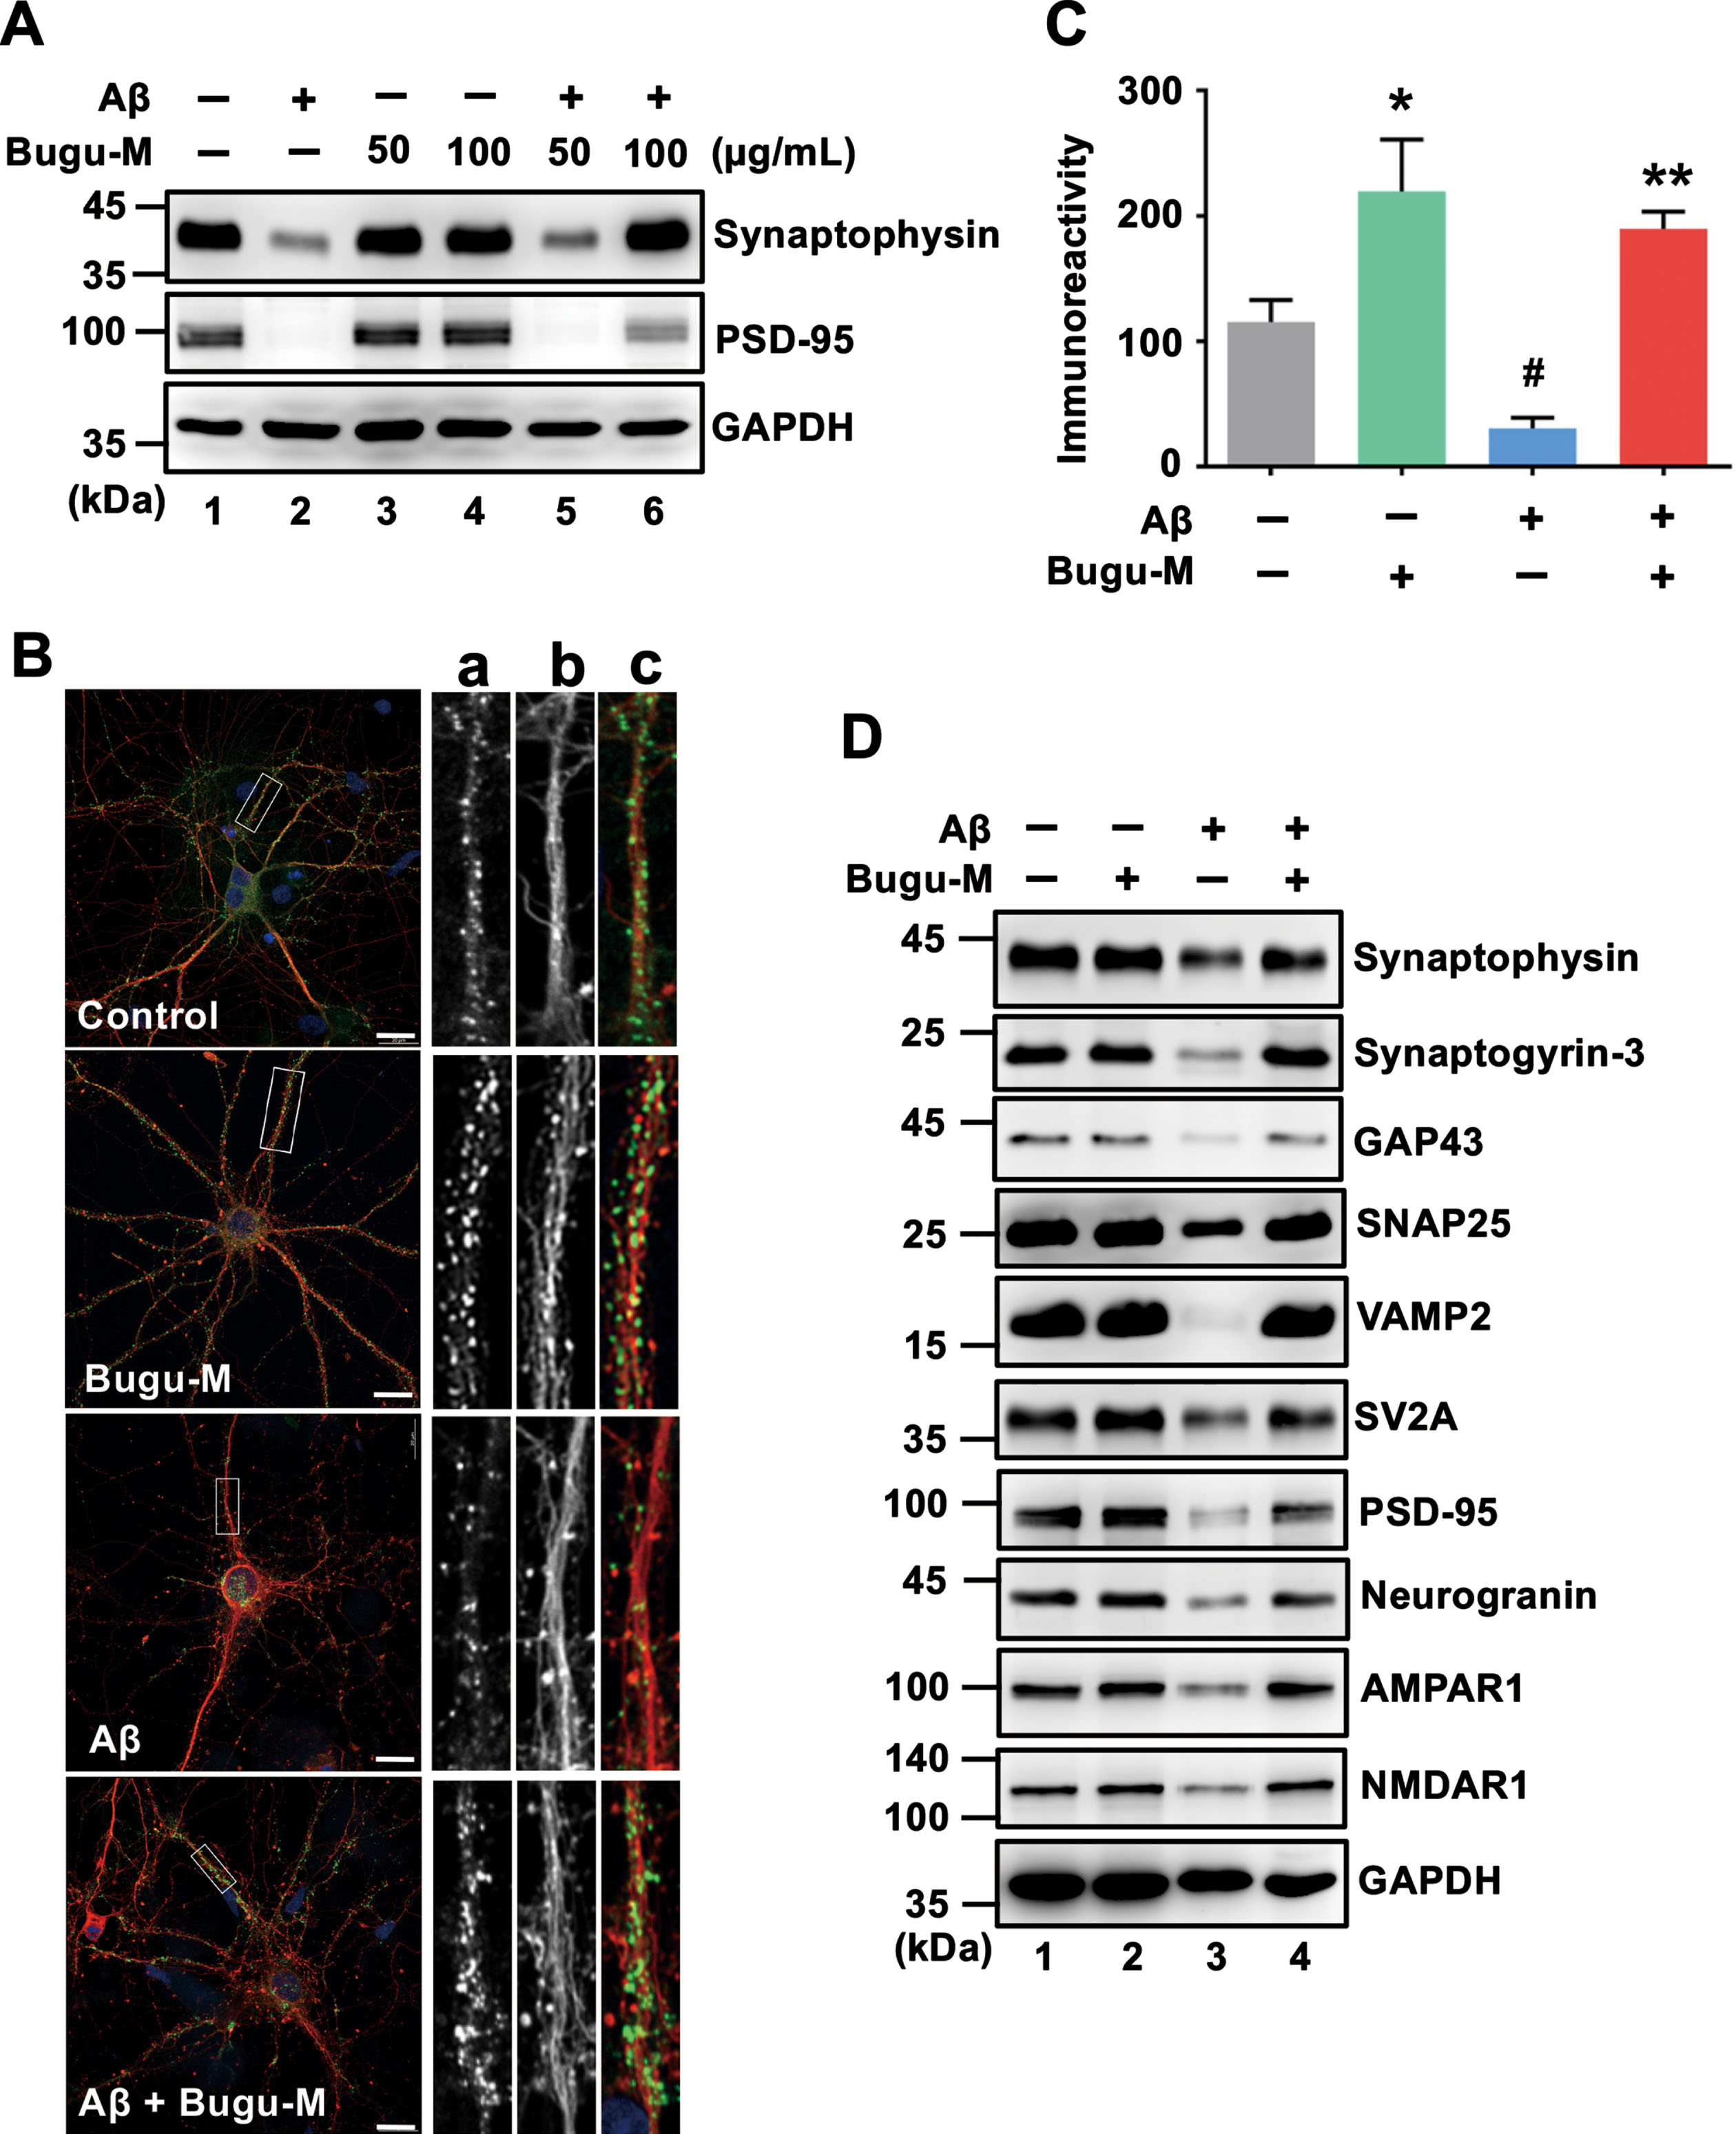 Bugu-M reverses Aβ-evoked synaptic disruption in neurons. A) Rat cortical neurons were pre-incubated with Bugu-M (50 and 100 μg/mL) for 1 h before Aβ25–35 stimulation for 72 h. Insoluble fractions were subject to immunoblotting for PSD-95 and synaptophysin. GAPDH was used as a loading control. B) Rat cortical neurons were pretreated with 100 μg/mL Bugu-M for 1 h and then incubated with Aβ25–35 for 72 h. Synaptic integrity was assessed by immunofluorescence co-labeling of PSD-95 (green, a) and β-III tubulin (red, b), and higher magnification images are shown in a-c (merge). Confocal images are single optical slices, and camera and microscope setting were equivalent for comparisons between groups. Shown are representative images. Scale bar, 10 μm. (C) PSD-95 immunoreactivity was quantified by ImageJ. Data are shown as mean±SEM (n = 3). Statistical significance between groups were analyzed by one-way ANOVA and Fisher‘s LSD test. #p < 0.05 versus the untreated control group; **p < 0.01 versus the Aβ group. D) Rat cortical neurons were pre-incubated with 100 μg/mL Bugu-M for 1 h followed by Aβ25–35 incubation for 72 h. The membrane-enriched fractions were subject to Westen blot analysis for presynaptic proteins (synaptophysin, synaptogyrin-3, GAP43, SNAP25, VAMP2, and SV2A), postsynaptic proteins (PSD-95 and neurogranin), and glutamate receptors (AMPAR1 and NMDAR1). GAPDH was used as a loading control. Densitometric quantification of immnoreactive bands was conducted using ImageJ, and the fold changes to control bands are analyzed in Supplementary Figure 4.